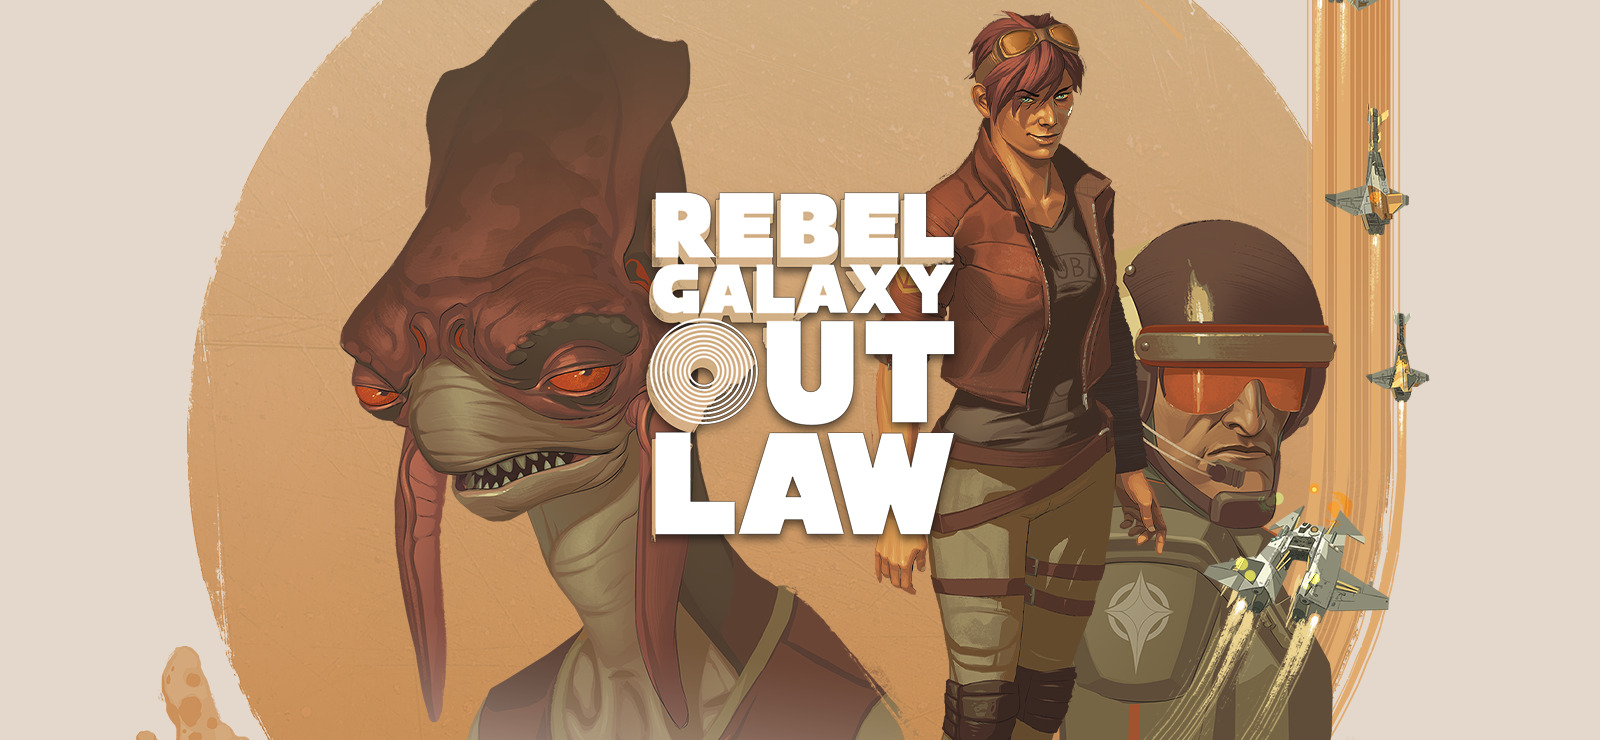 Star wars tm outlaws. Galactic Outlaws v0.1. Galactic Outlaws v0.1 gustabin. Rabble Galaxy Outlaw 2 Base.